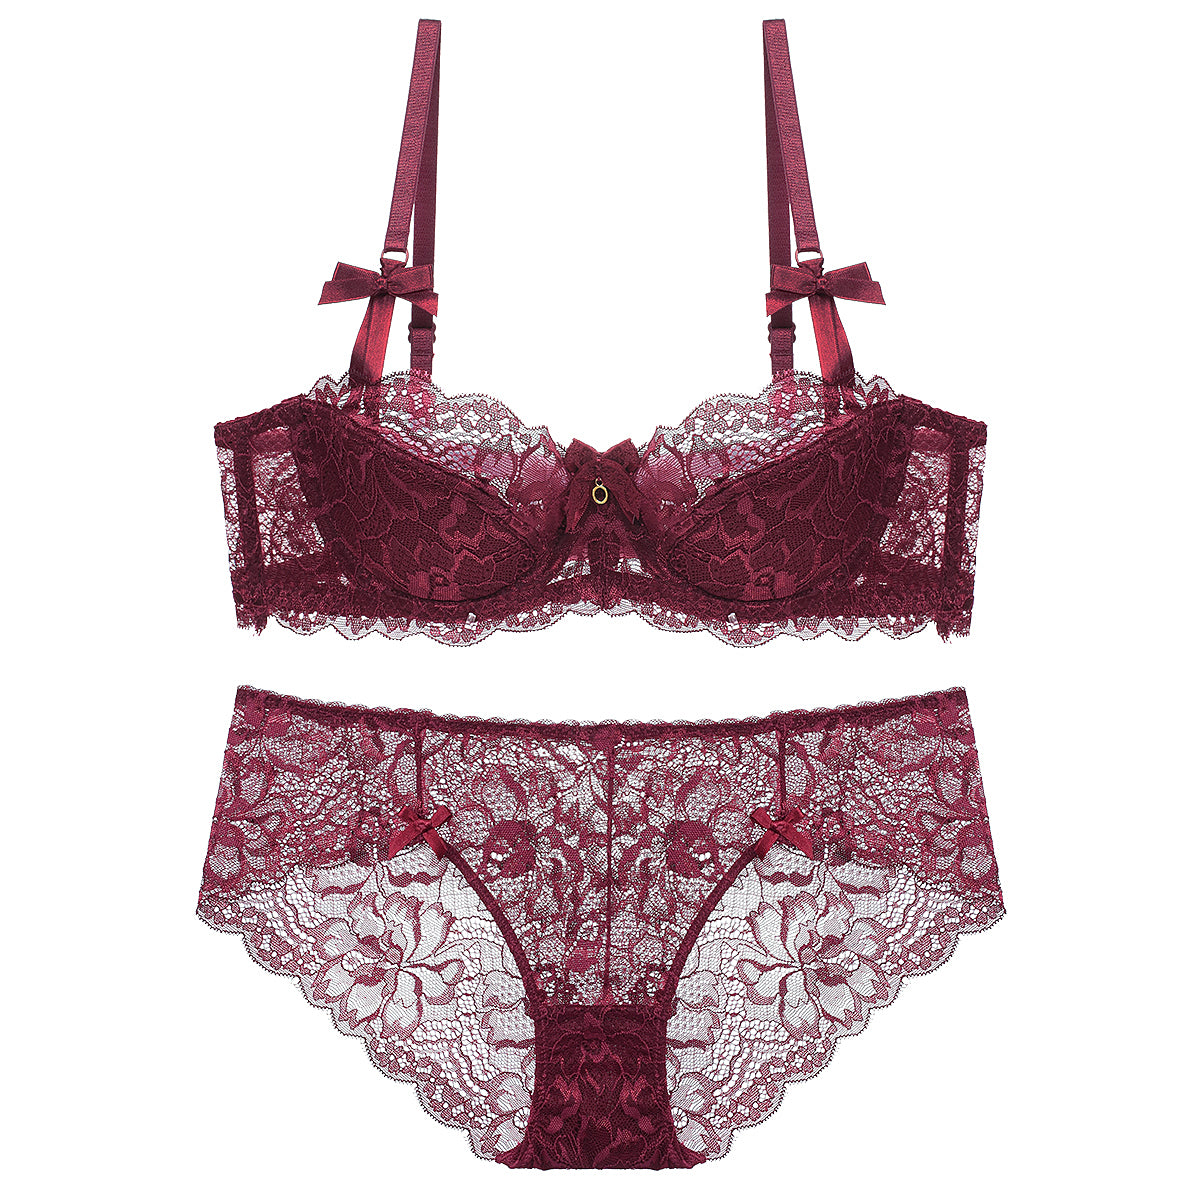 sexy lace lingerie in wine red color